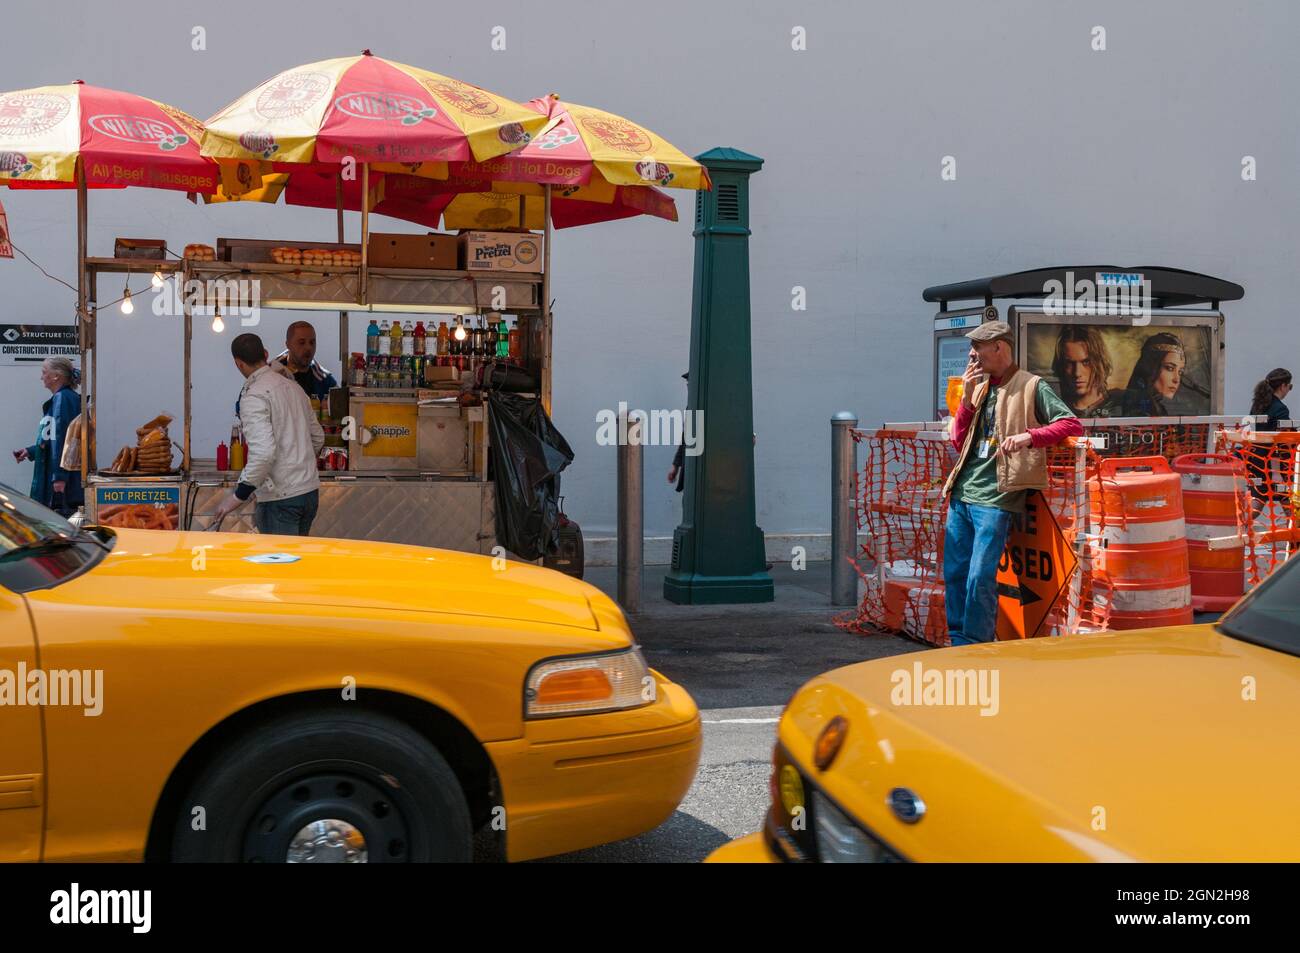 USA, NEW YORK, SCENE OF LIFE ON A NEW YORK STREET WITH YELLOW TAXIS IN THE FOREGROUND Stock Photo